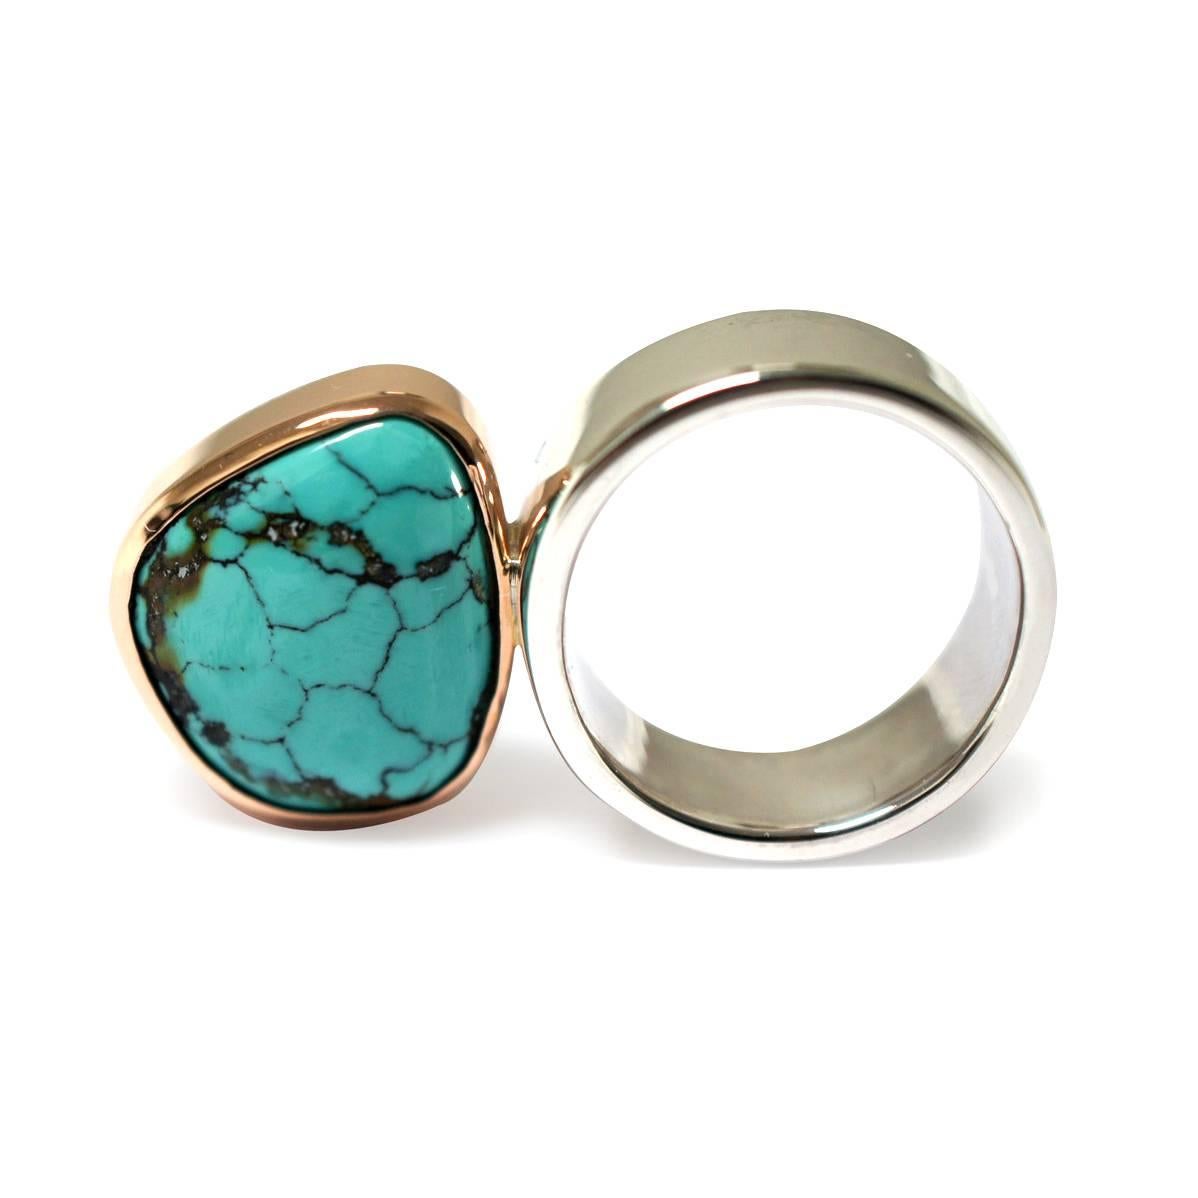 Handcrafted in Sydney, out of sterling silver and 9 karat rose gold, and set with a double-sided free form turquoise gem, this ring is a sculptural statement piece. This ring is a one-off piece, and only one is available.

Width of stone at widest